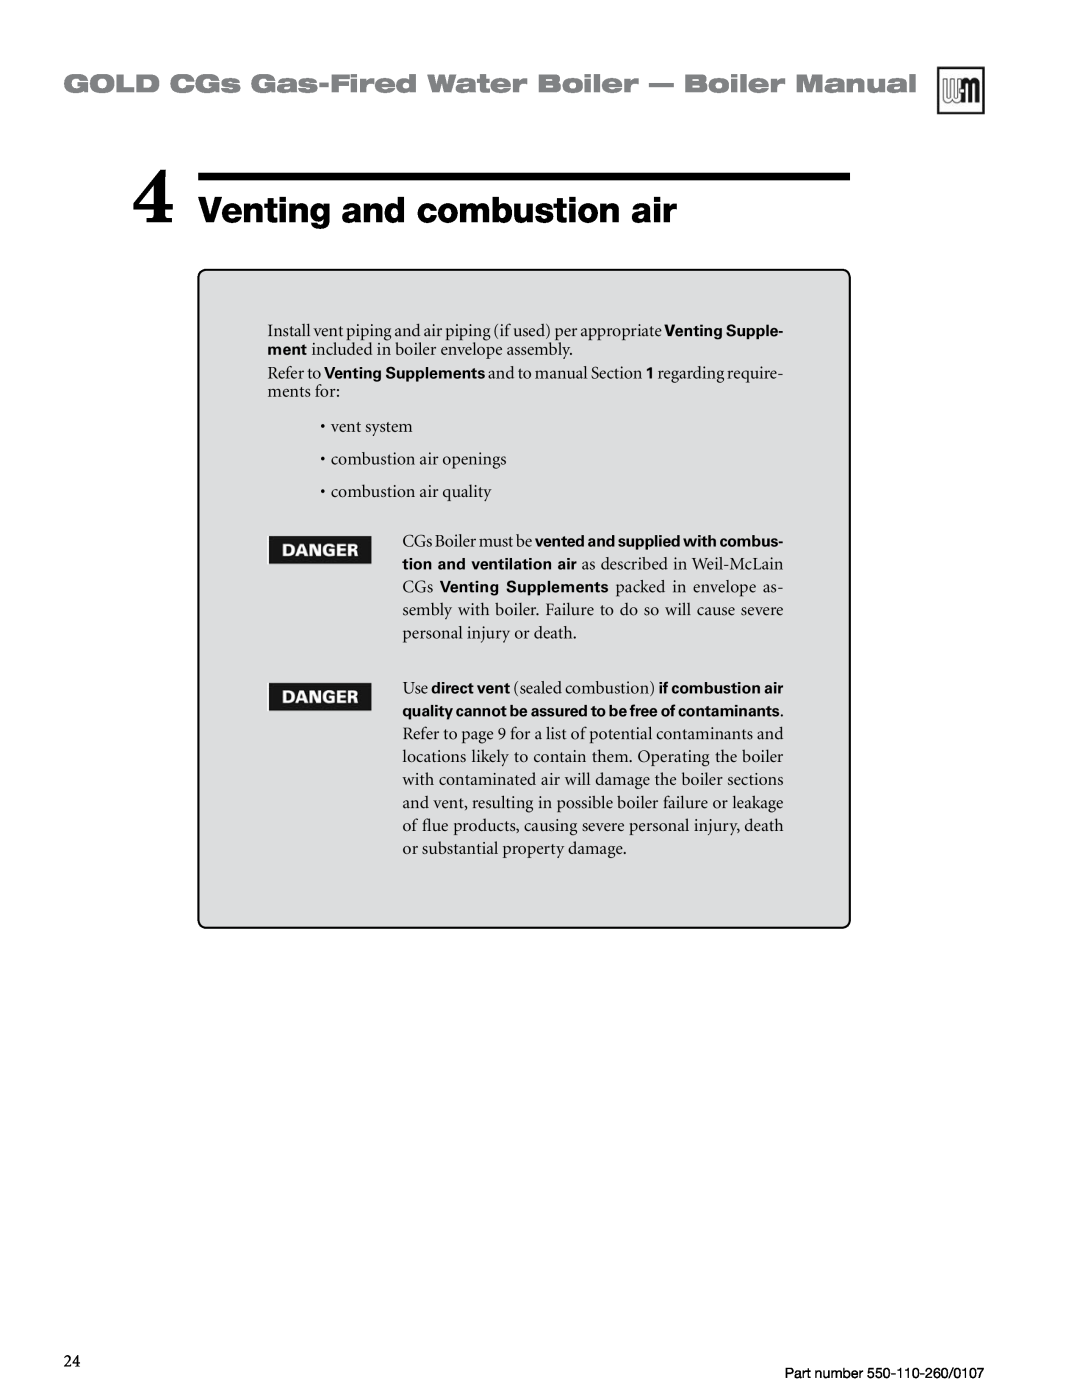 Weil-McLain 550-110-260/0107 manual Venting and combustion air, GOLD CGs Gas-FiredWater Boiler — Boiler Manual 